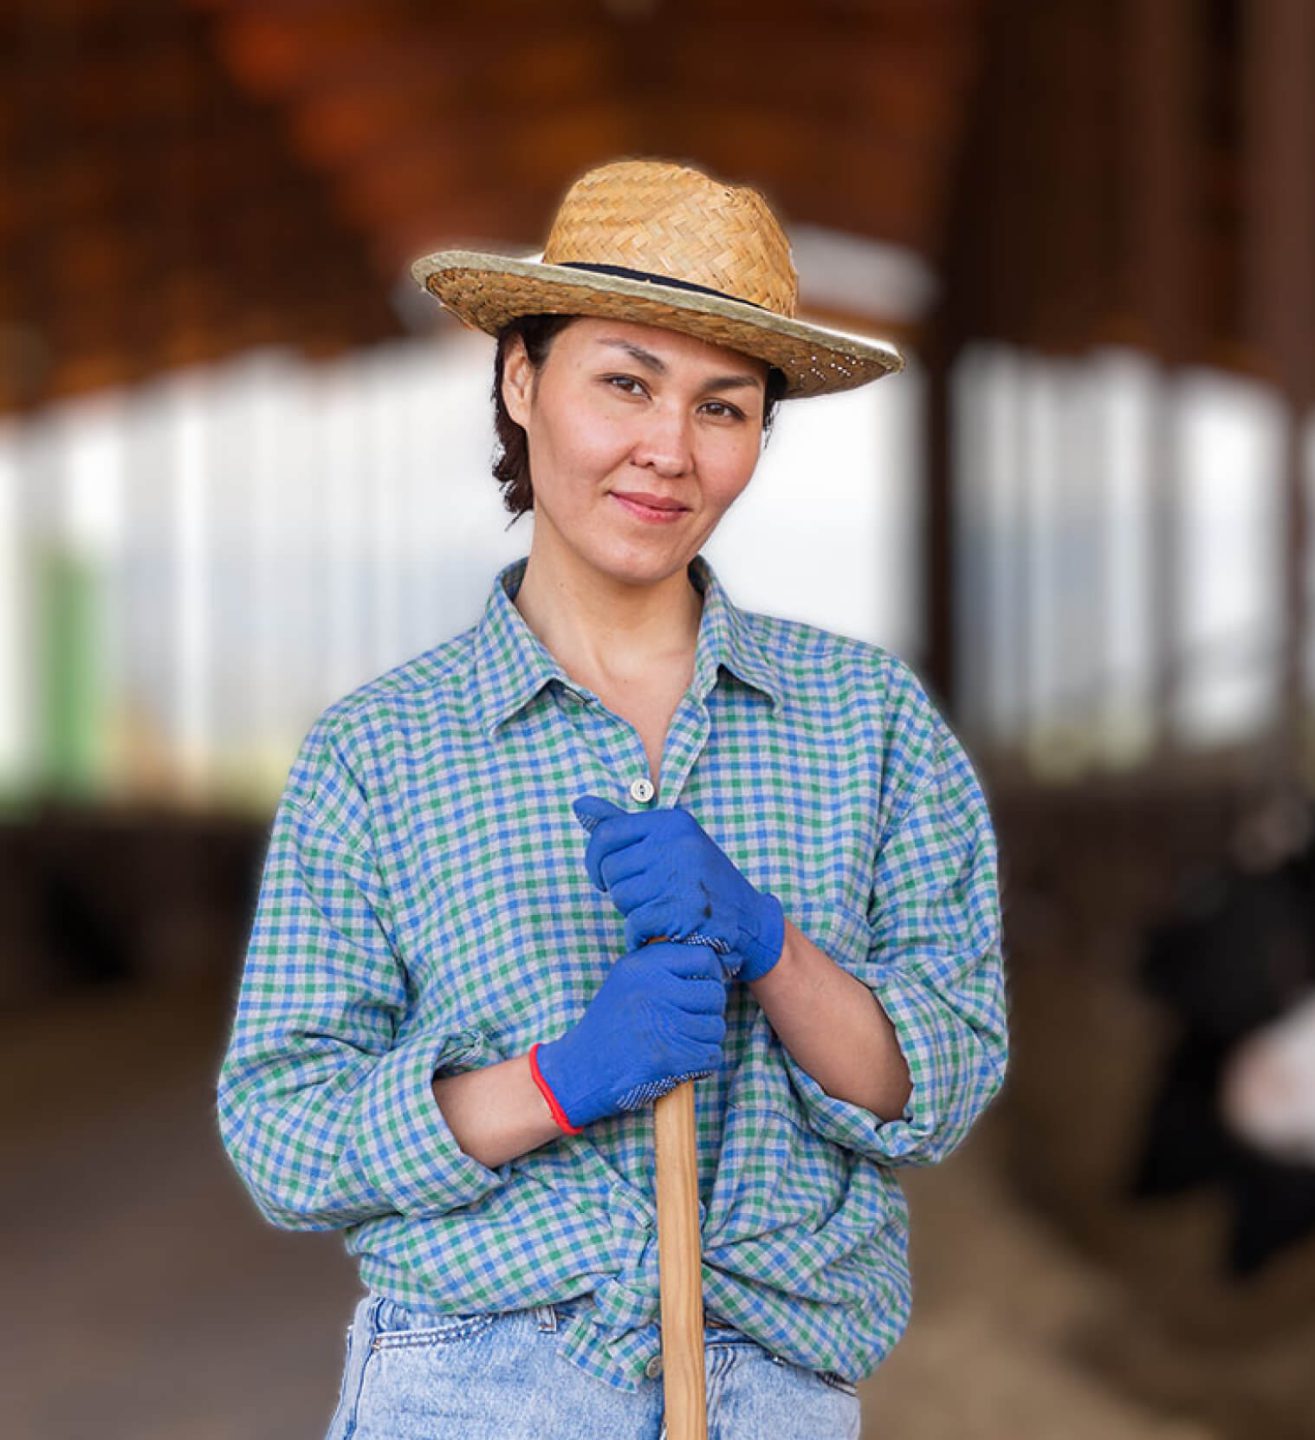 A Caucasian woman in a straw hat looking at the camera on stables background, leaning on a shovel